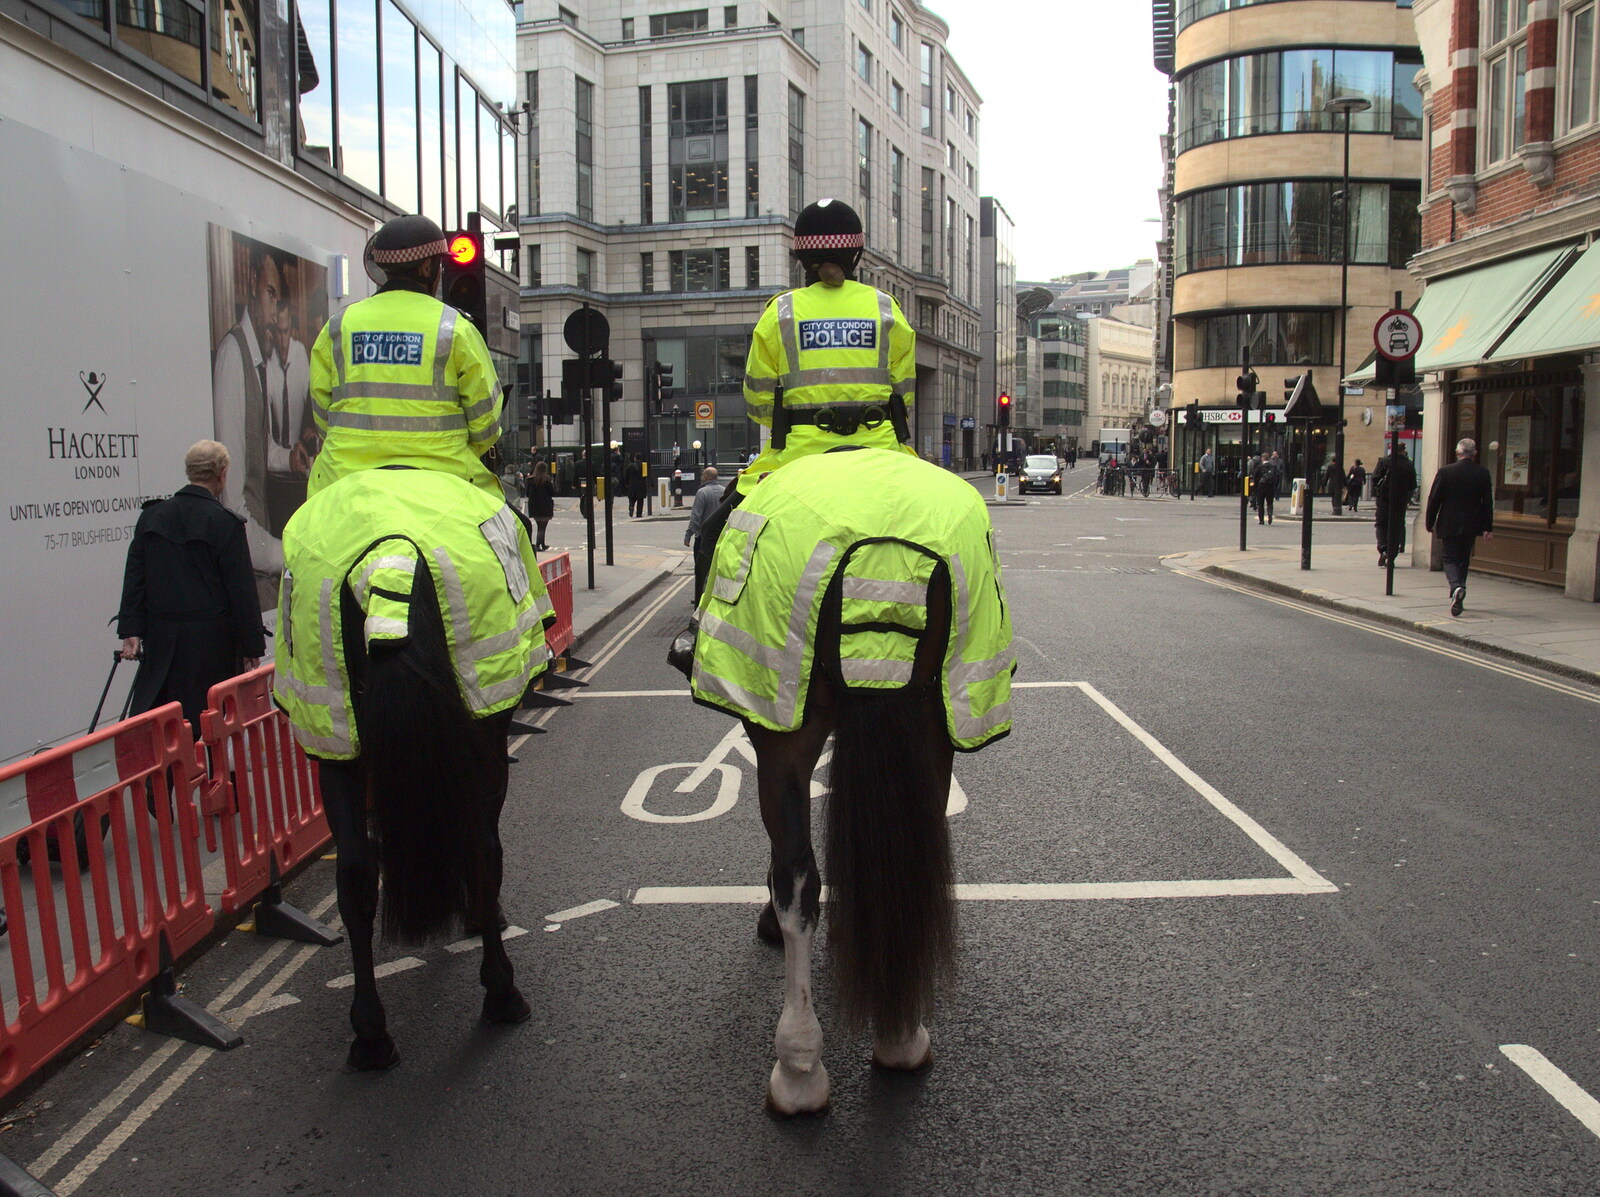 A pair of horse's arses on Old Broad Street from A Bomb Scare and Fred Does Building, London and Suffolk - 30th October 2014